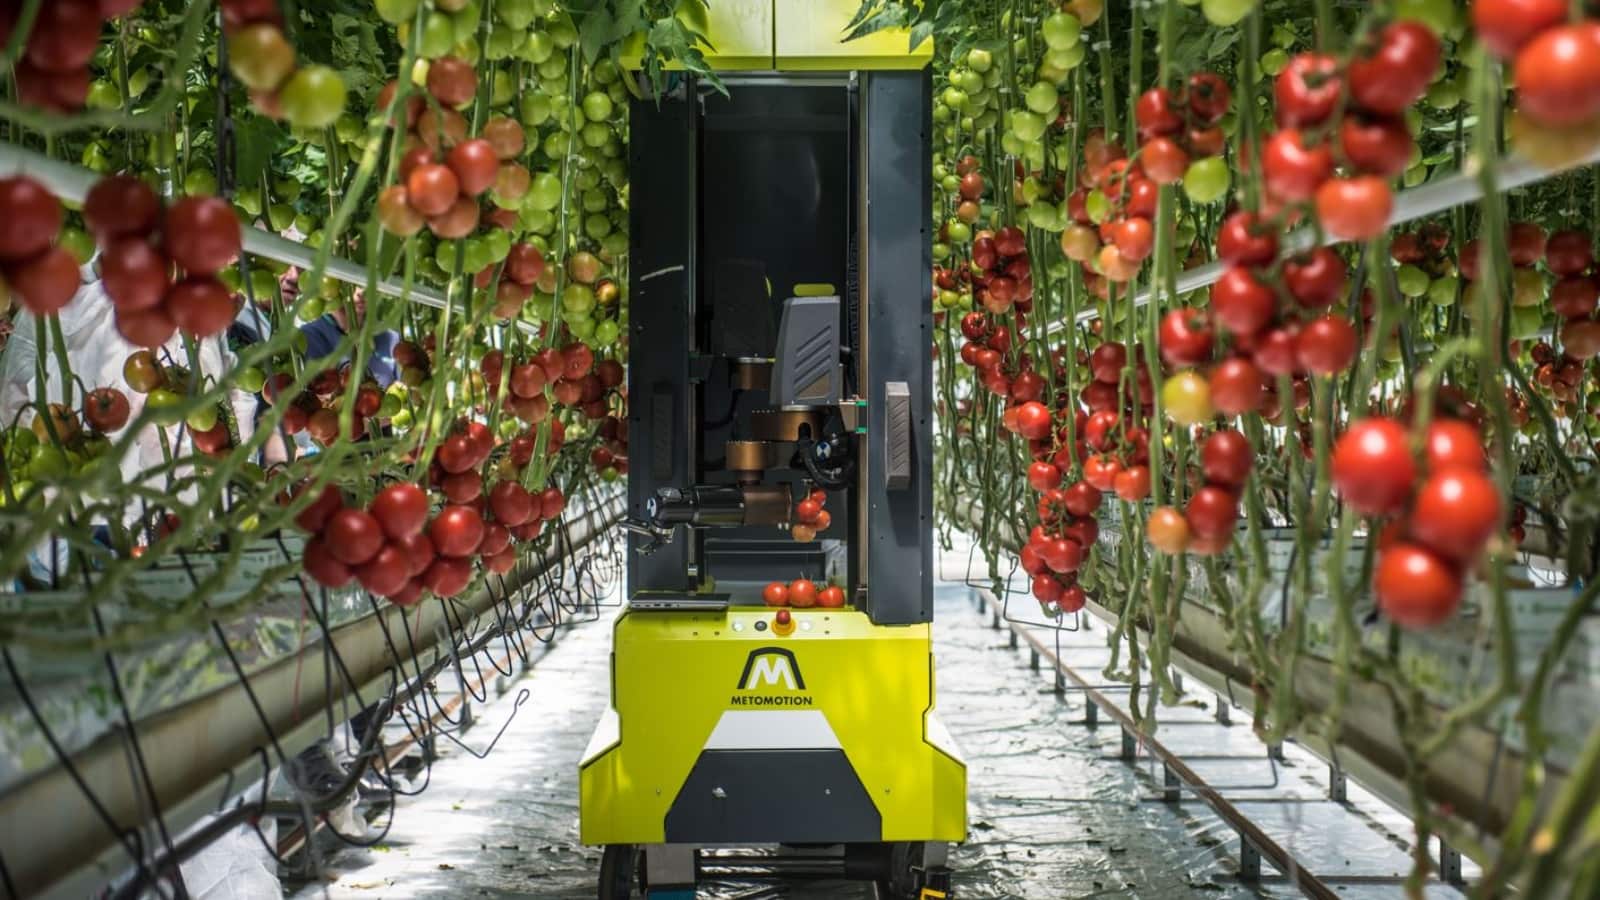 MetoMotion designs robots that replace human farm labor. Photo courtesy of MetoMotion